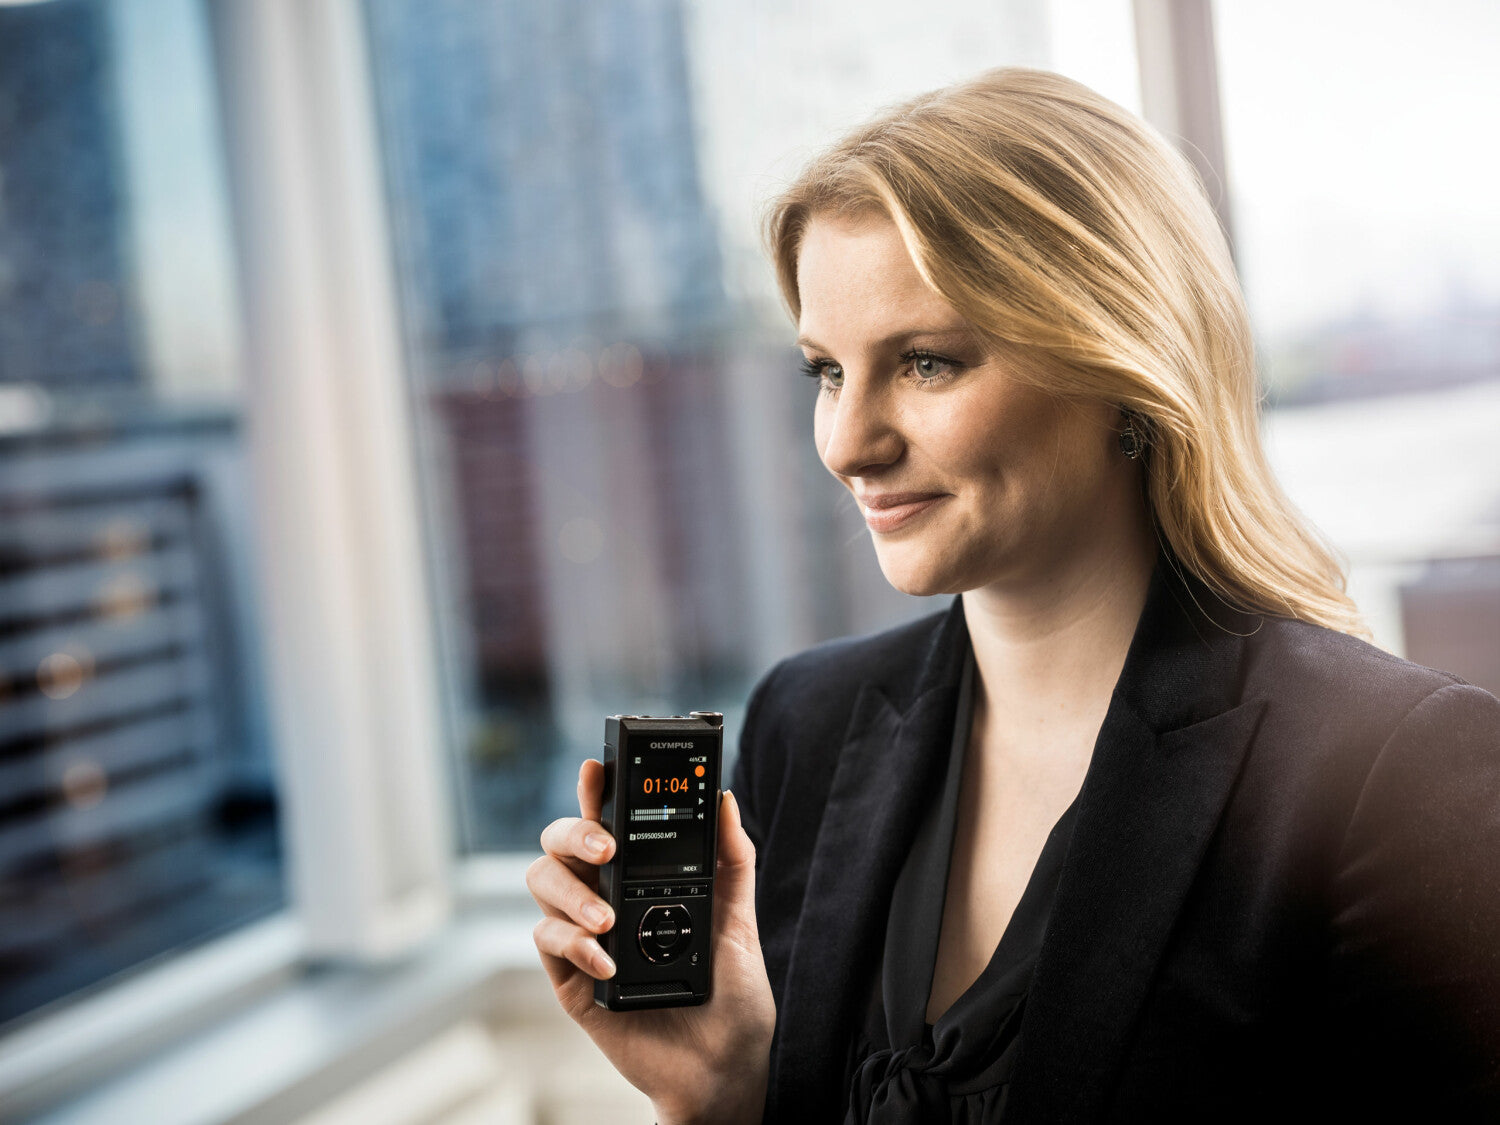 female lawyer holding olympus ds9000